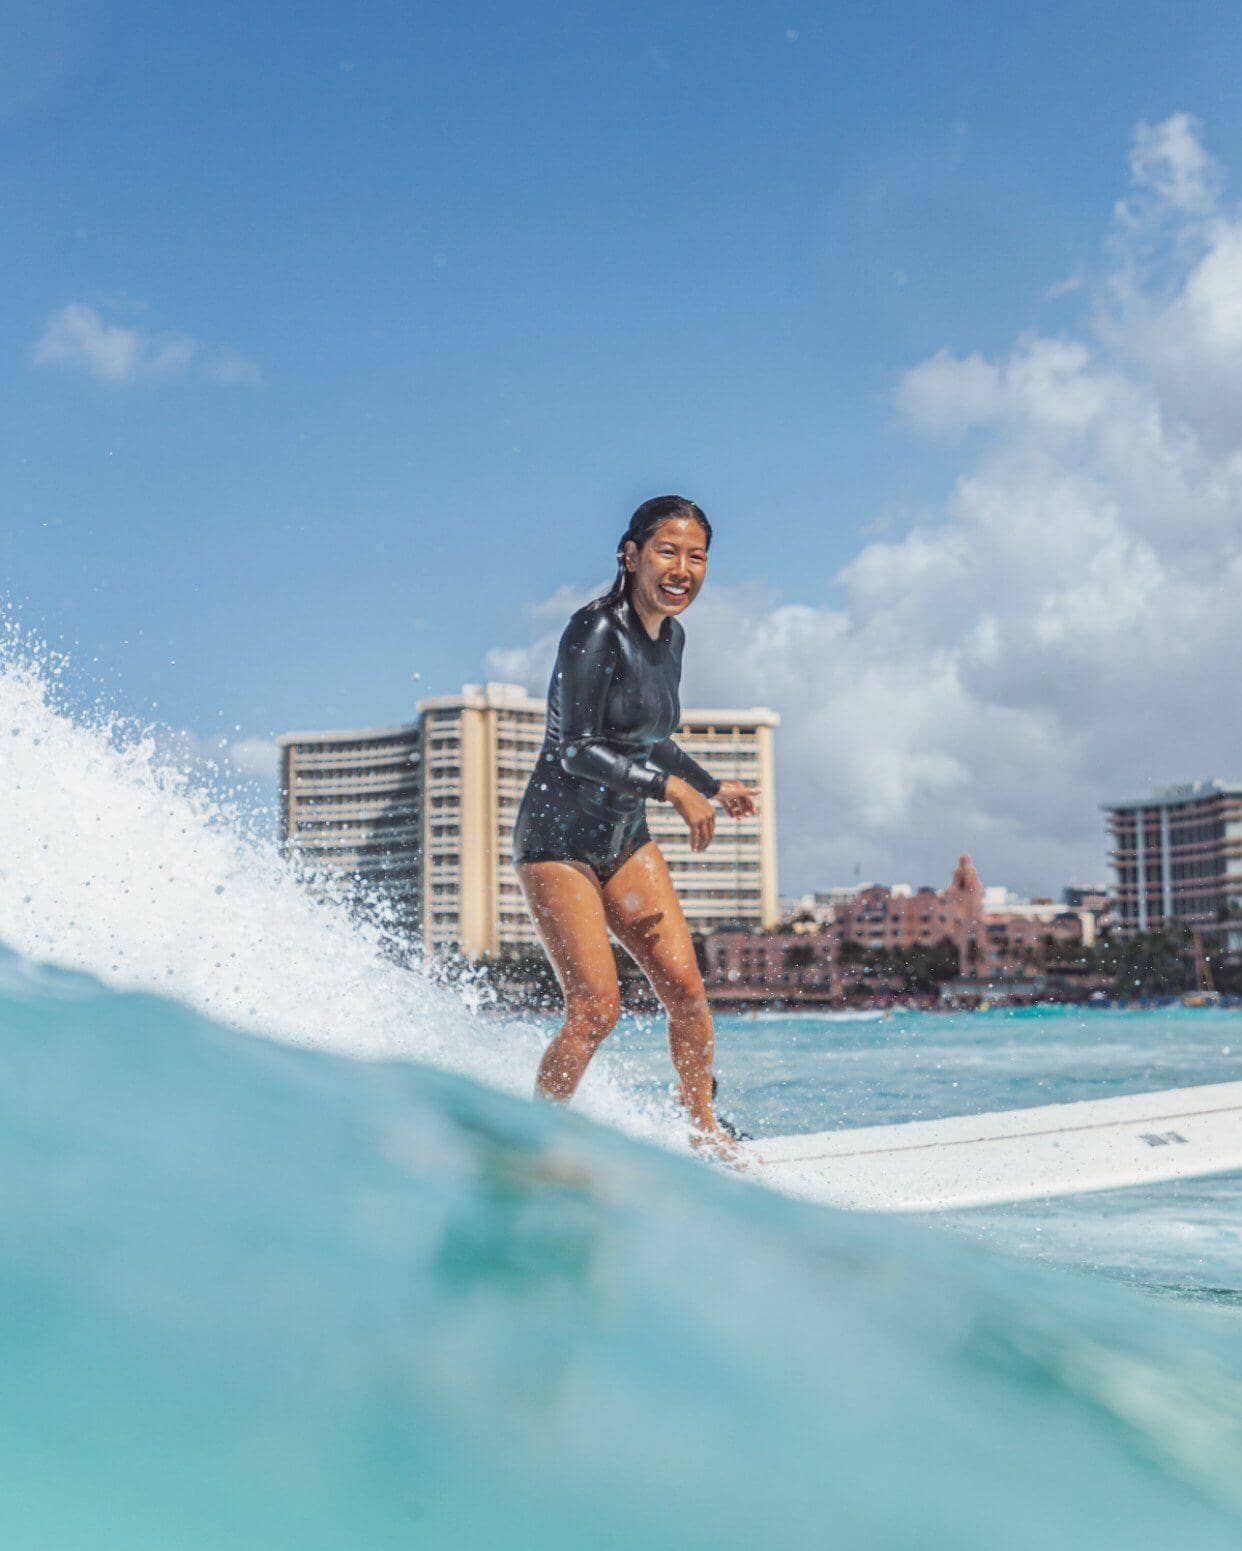 <h1 style="font-family: Georgia, serif; font-size: 30px; color: #53565A;">Do It Like a Wahine: <br>Surfer Yuria</h1>